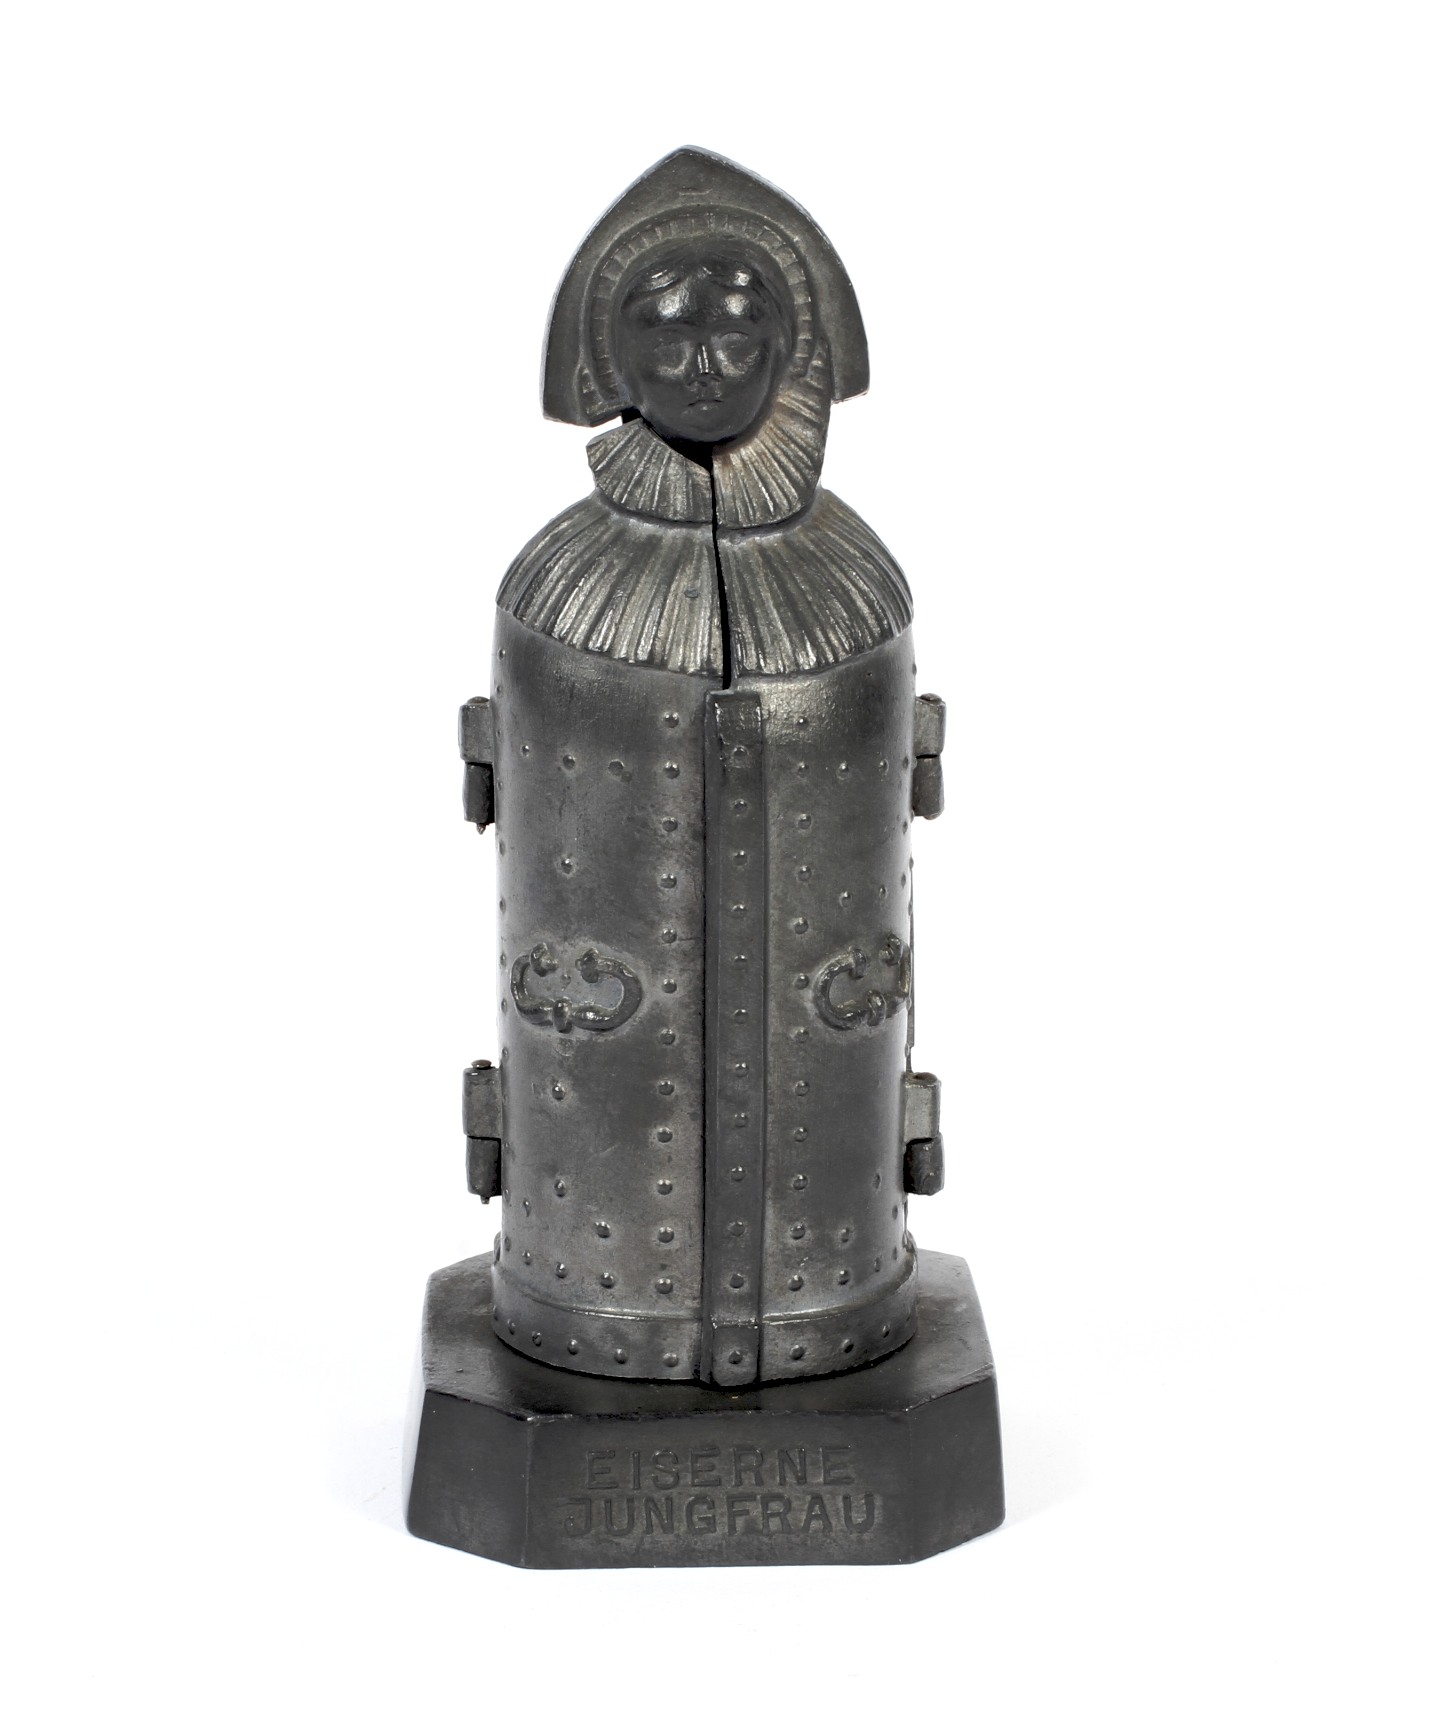 A pewter miniature model of an Iron Maid